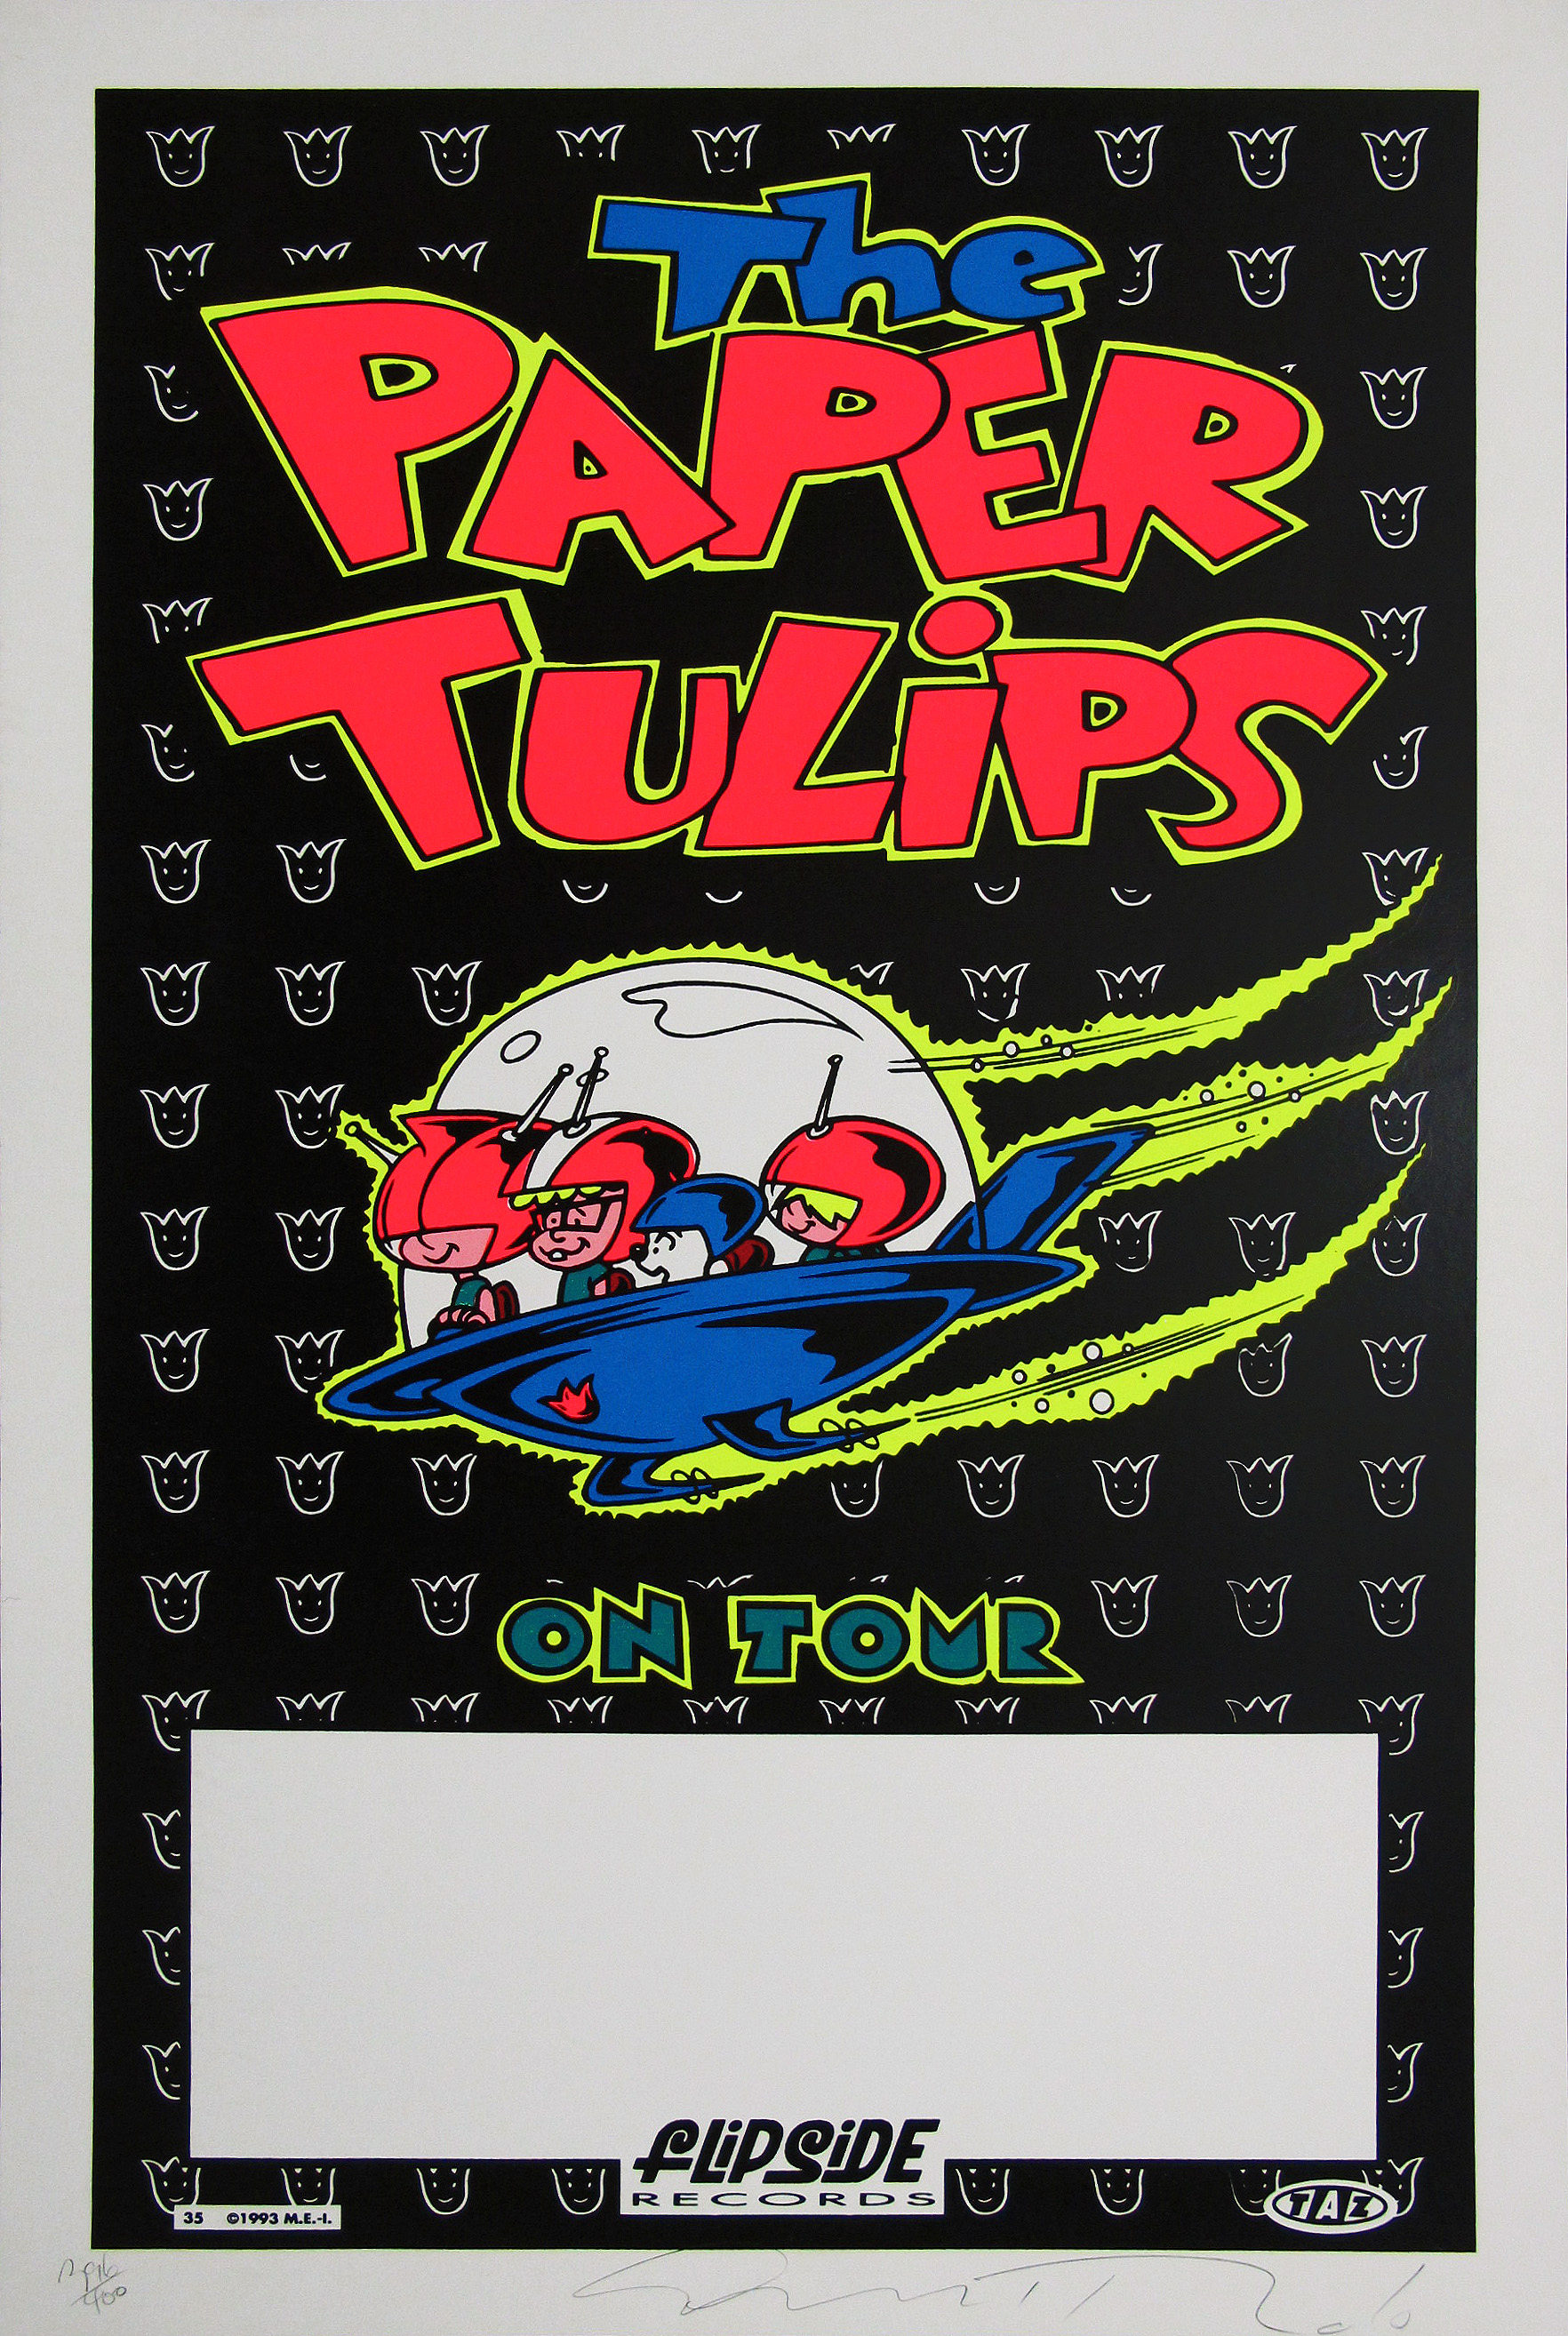 Paper Tulips Tour Poster